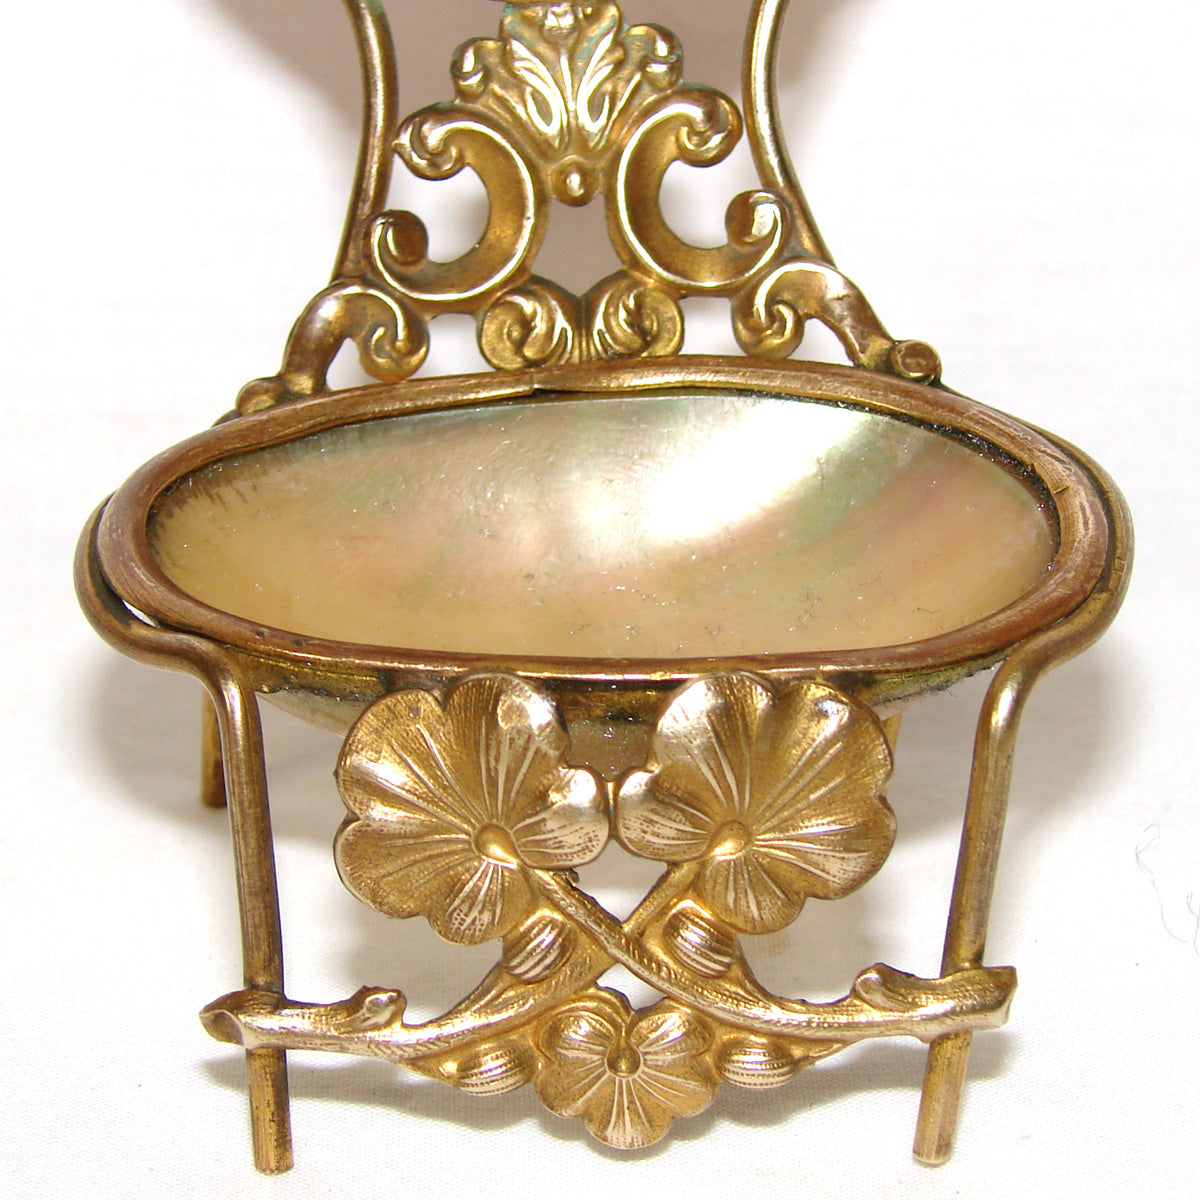 Antique French Palais Royal Grand Tour Style Souvenir Pocket Watch Stand, Mother of Pearl Dish: The Madeleine, Paris